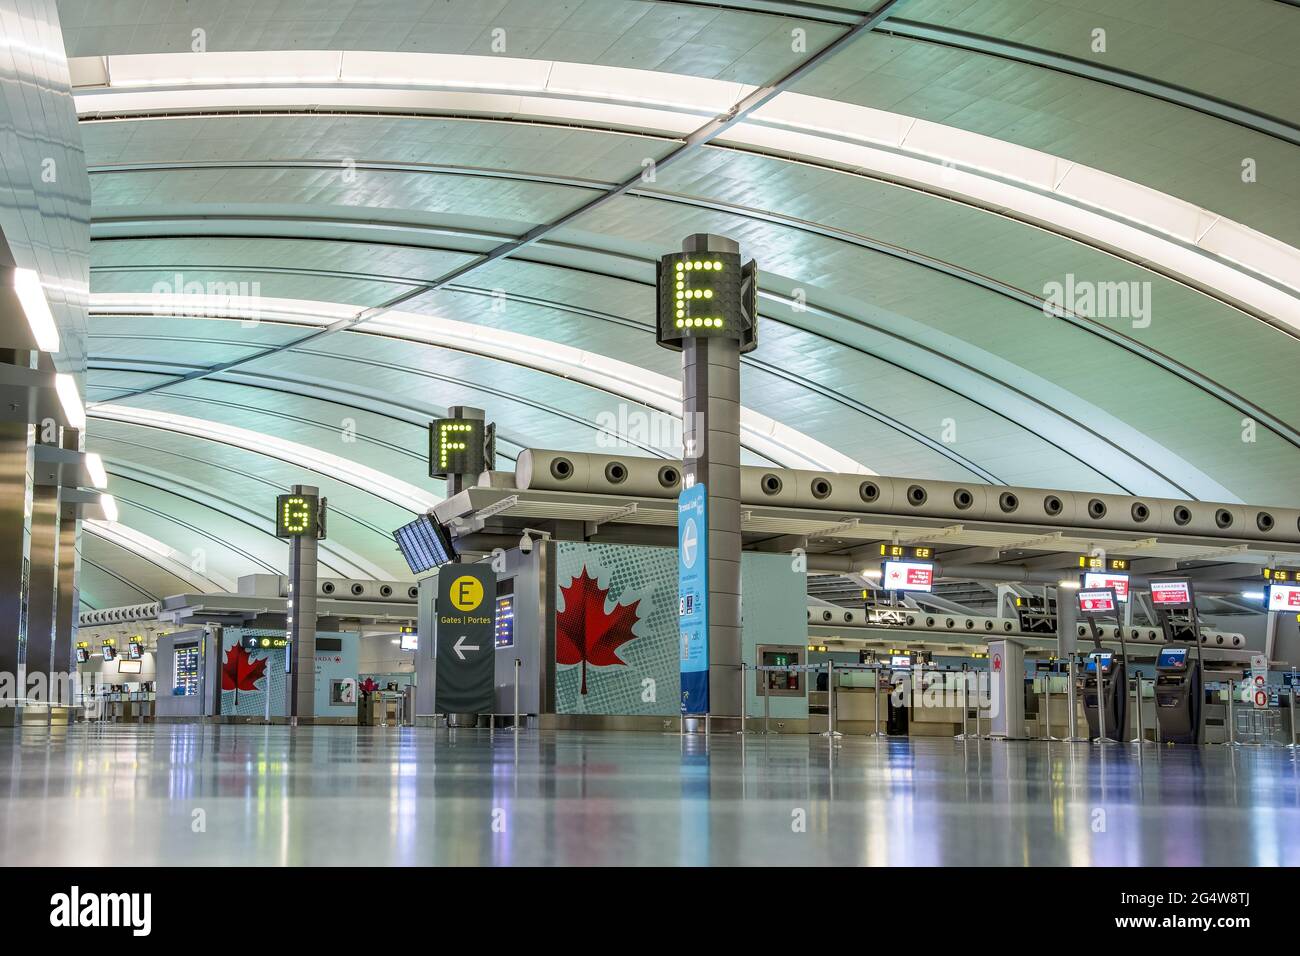 Toronto Pearson International Airport, one of the busiest airports in North America. Different areas of the Toronto Pearson International Airport Stock Photo